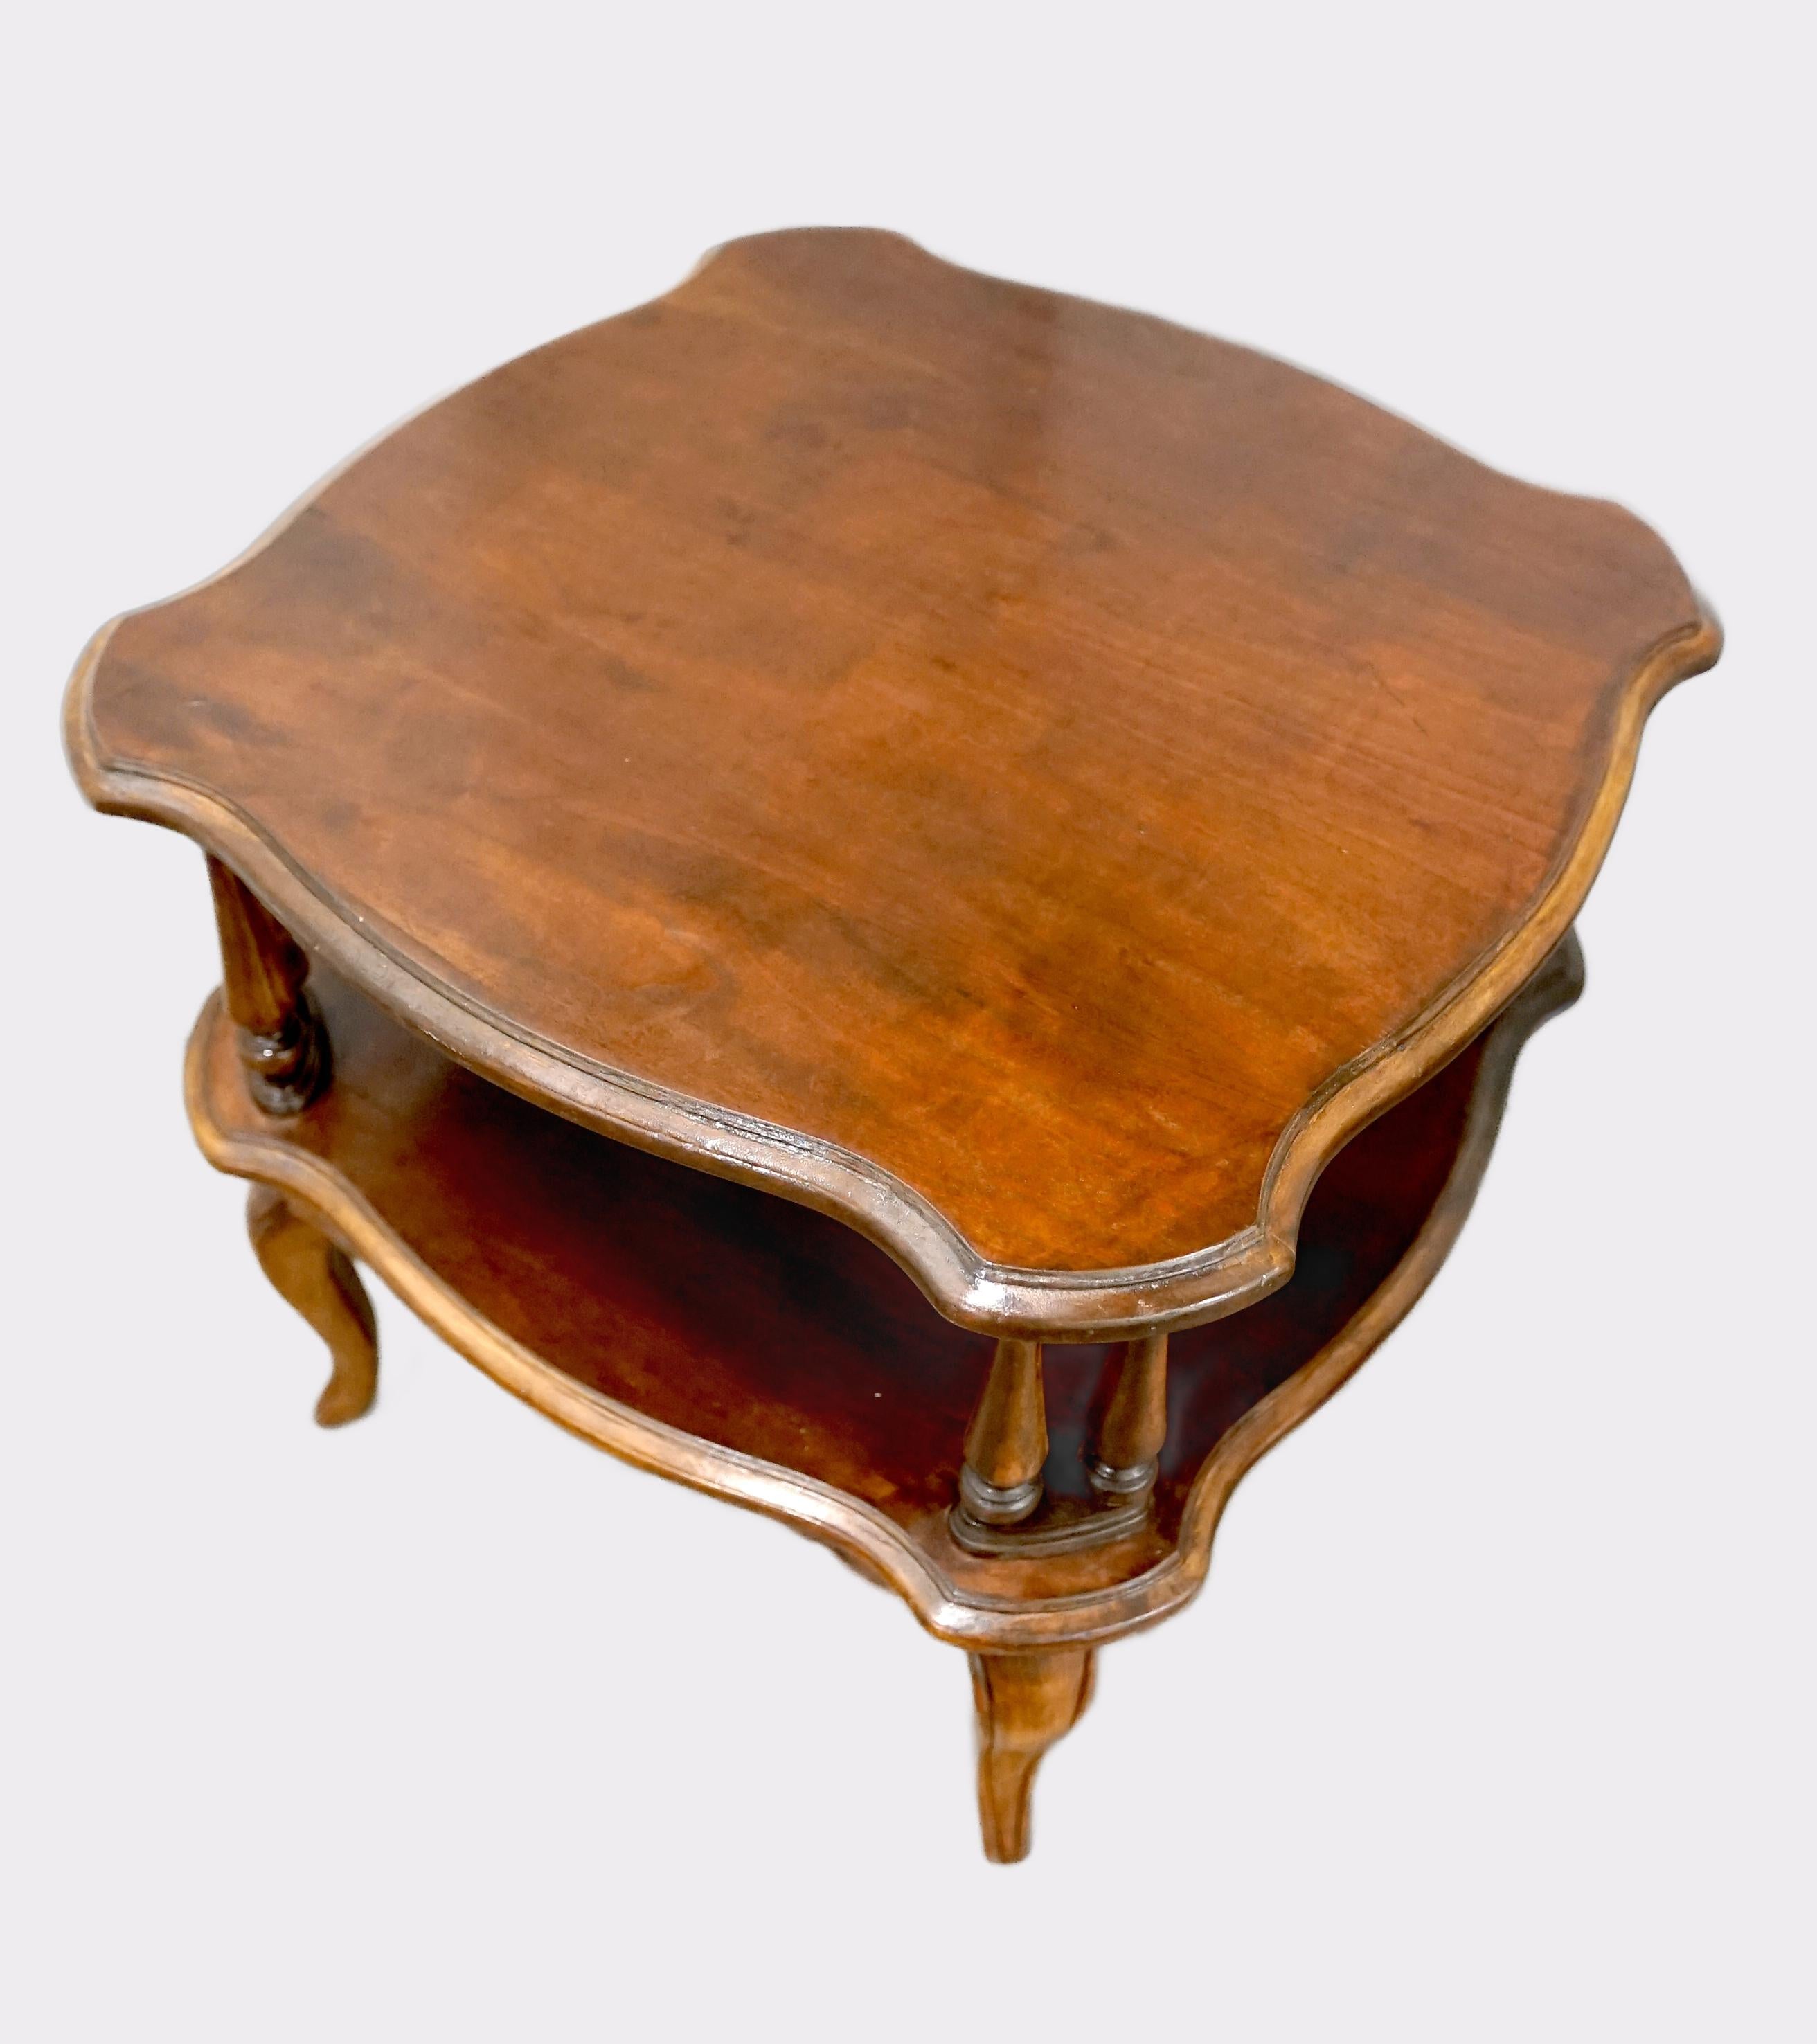 This table is a beautiful cherry wood two tier Queen Anne style piece. It has gently scalloped corners around the top and turned posts. This is a midcentury piece that has been refinished at some point in its history, but the table is solid and